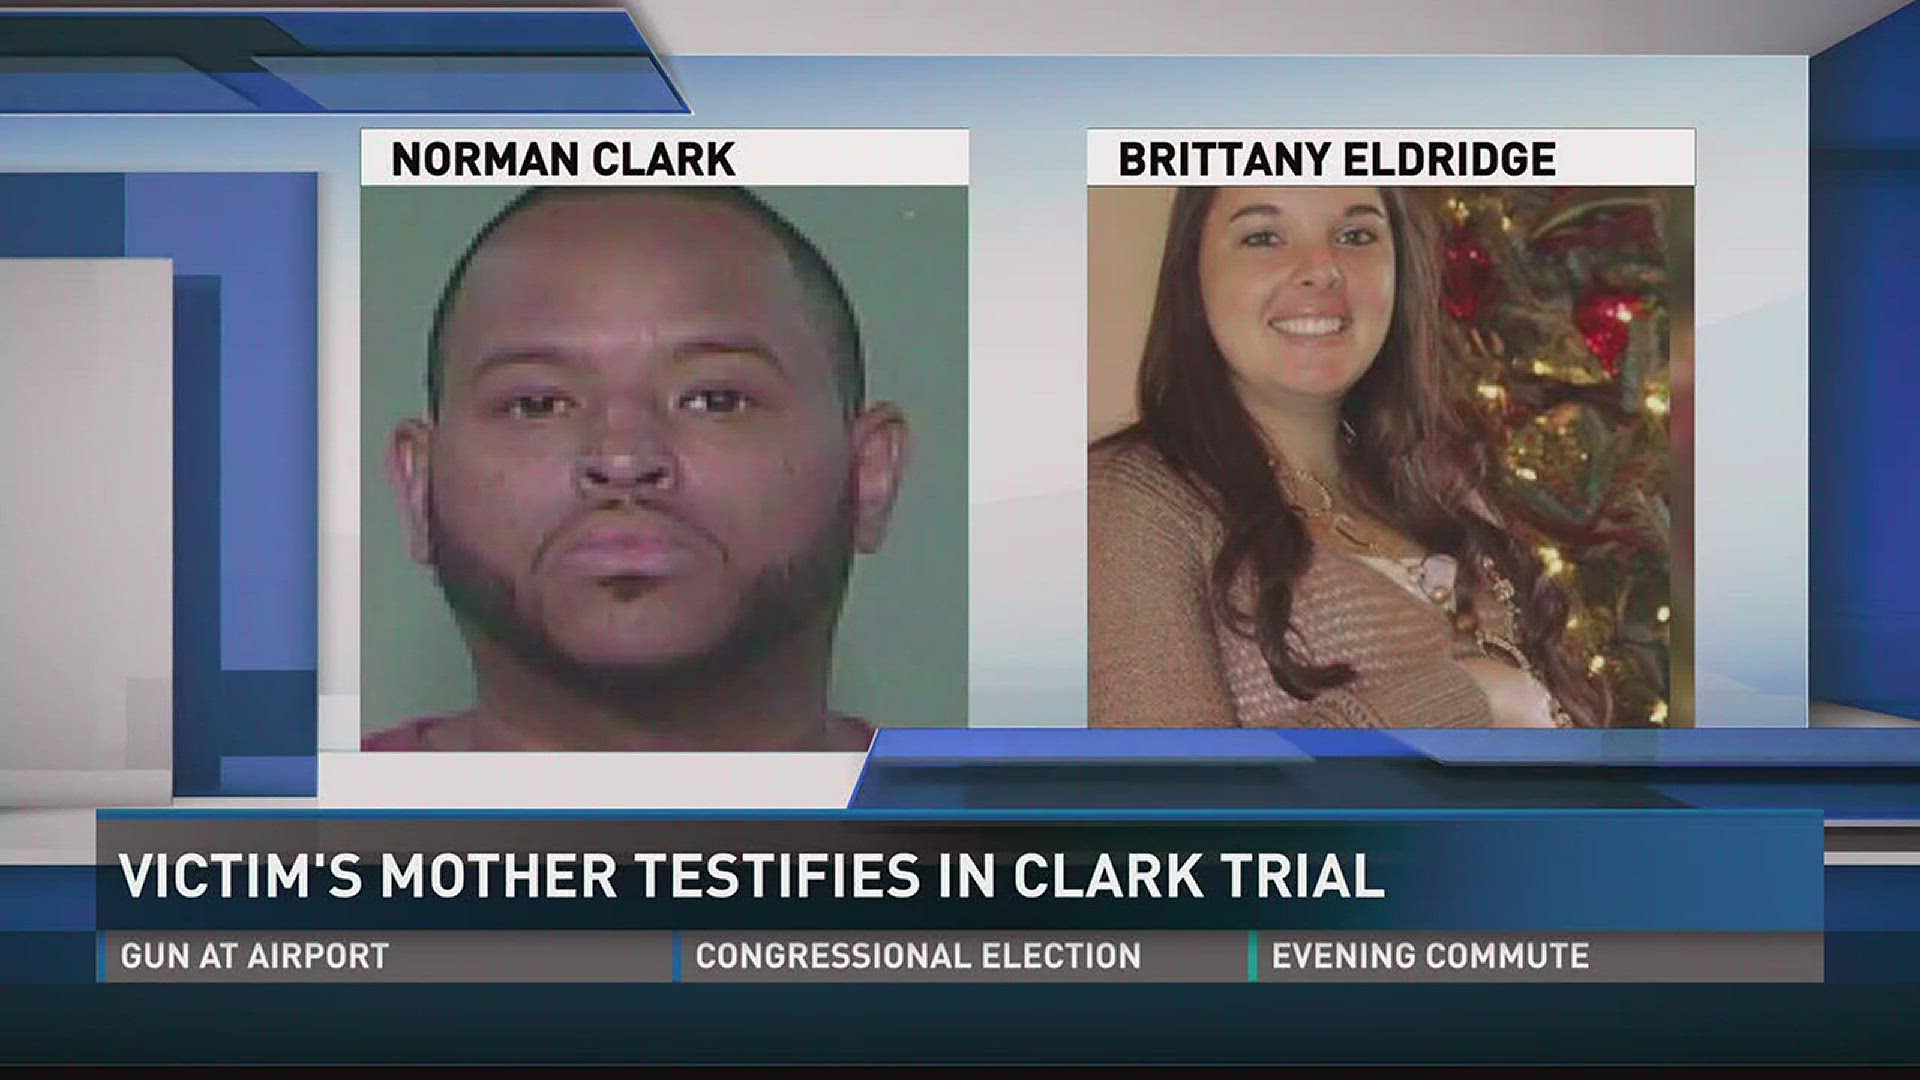 Clark faces two counts of first-degree intentional homicide and two counts of felony murder. If convicted, could could face life in prison with the possibility of parole.